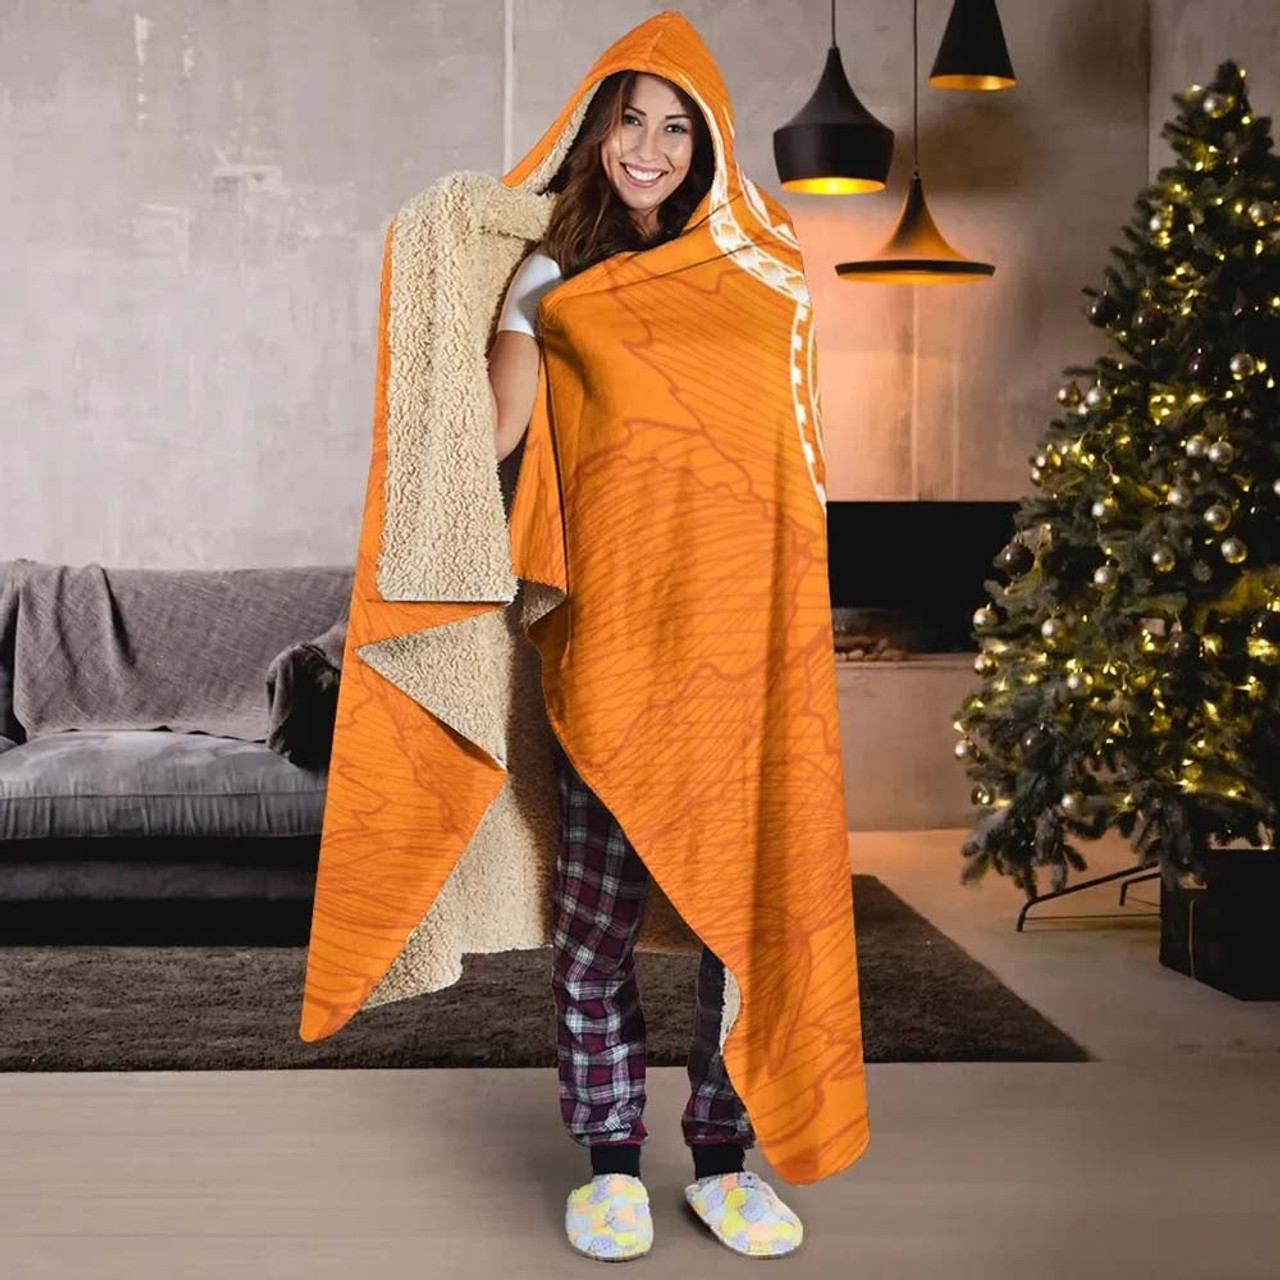 Tonga Polynesian Hooded Blanket - Orange Floral With Seal 2